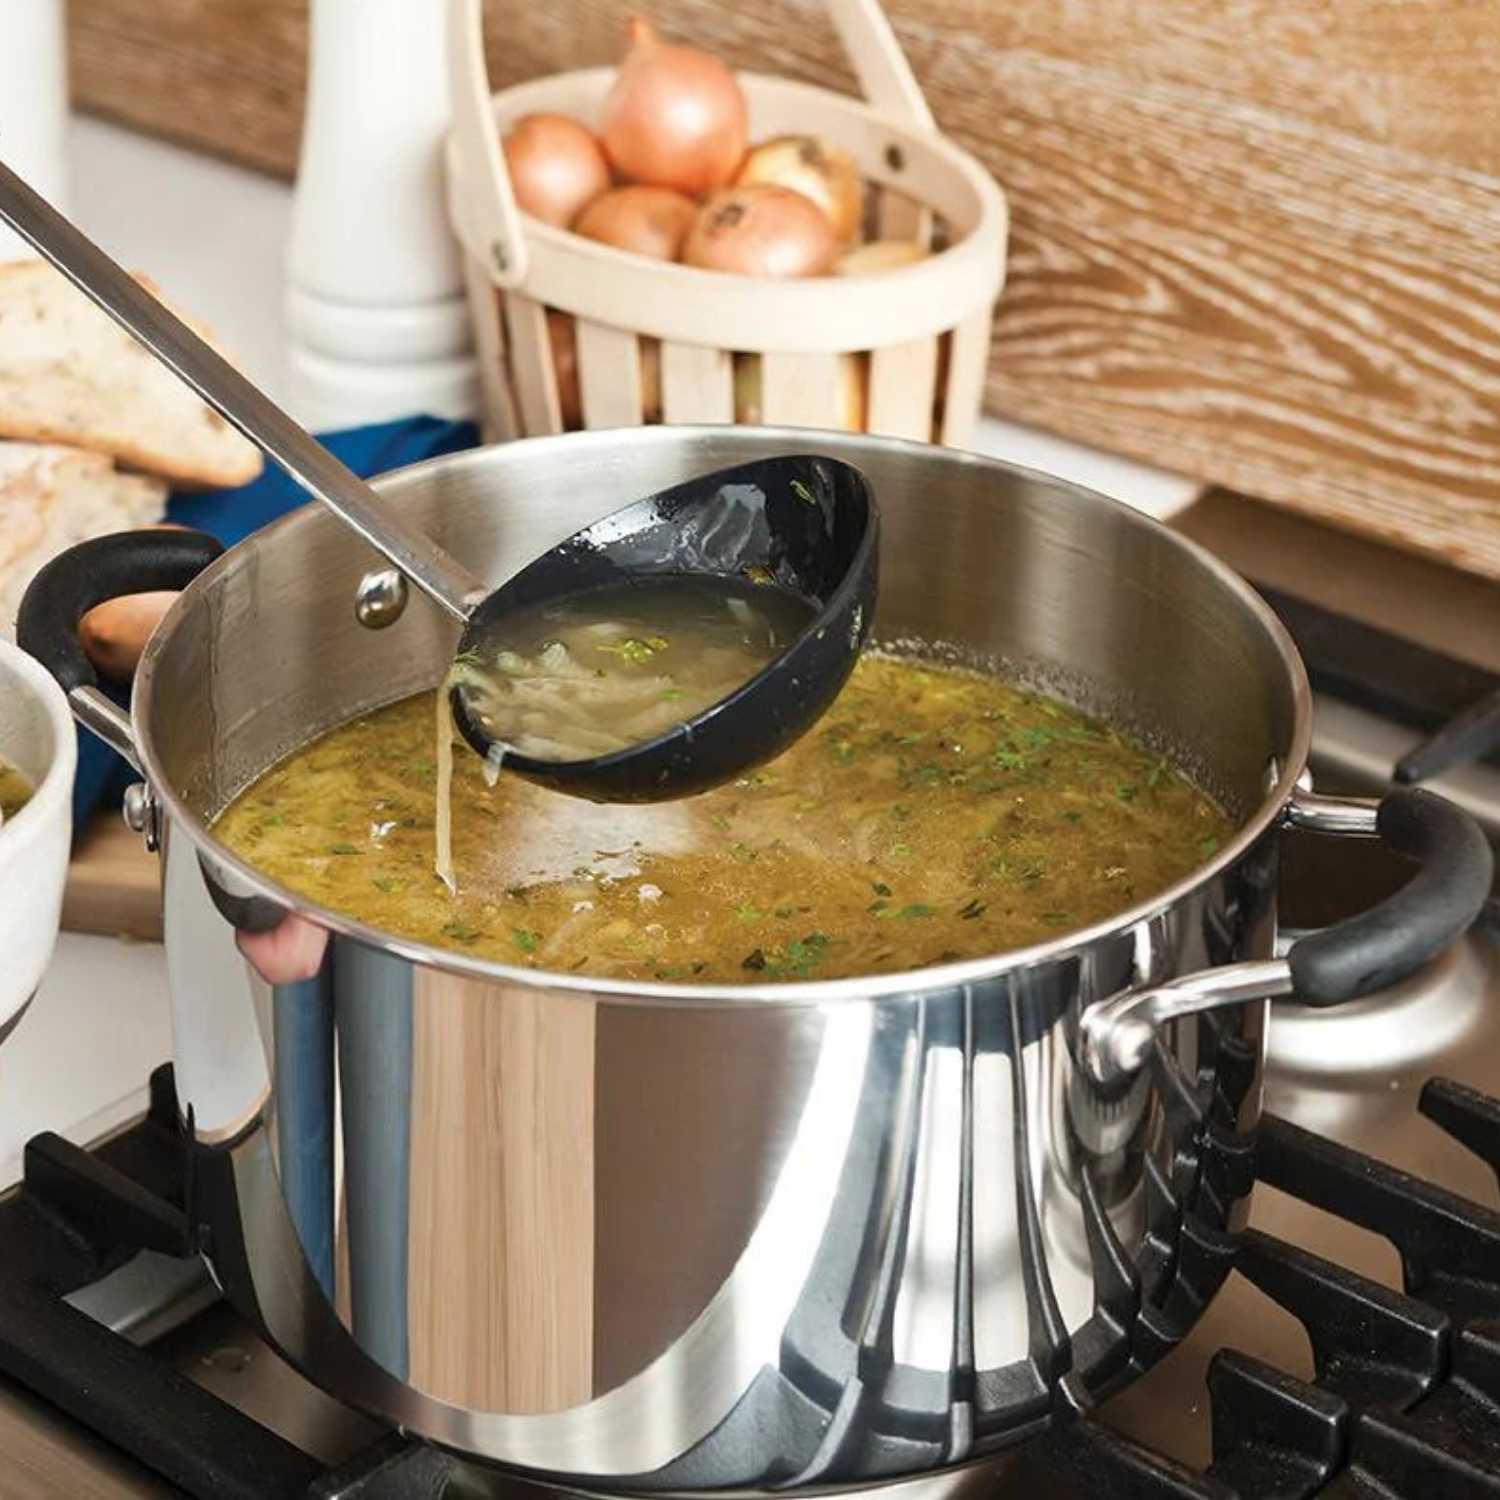 RACO Contemporary 26cm/9.5L Stainless Steel Stockpot